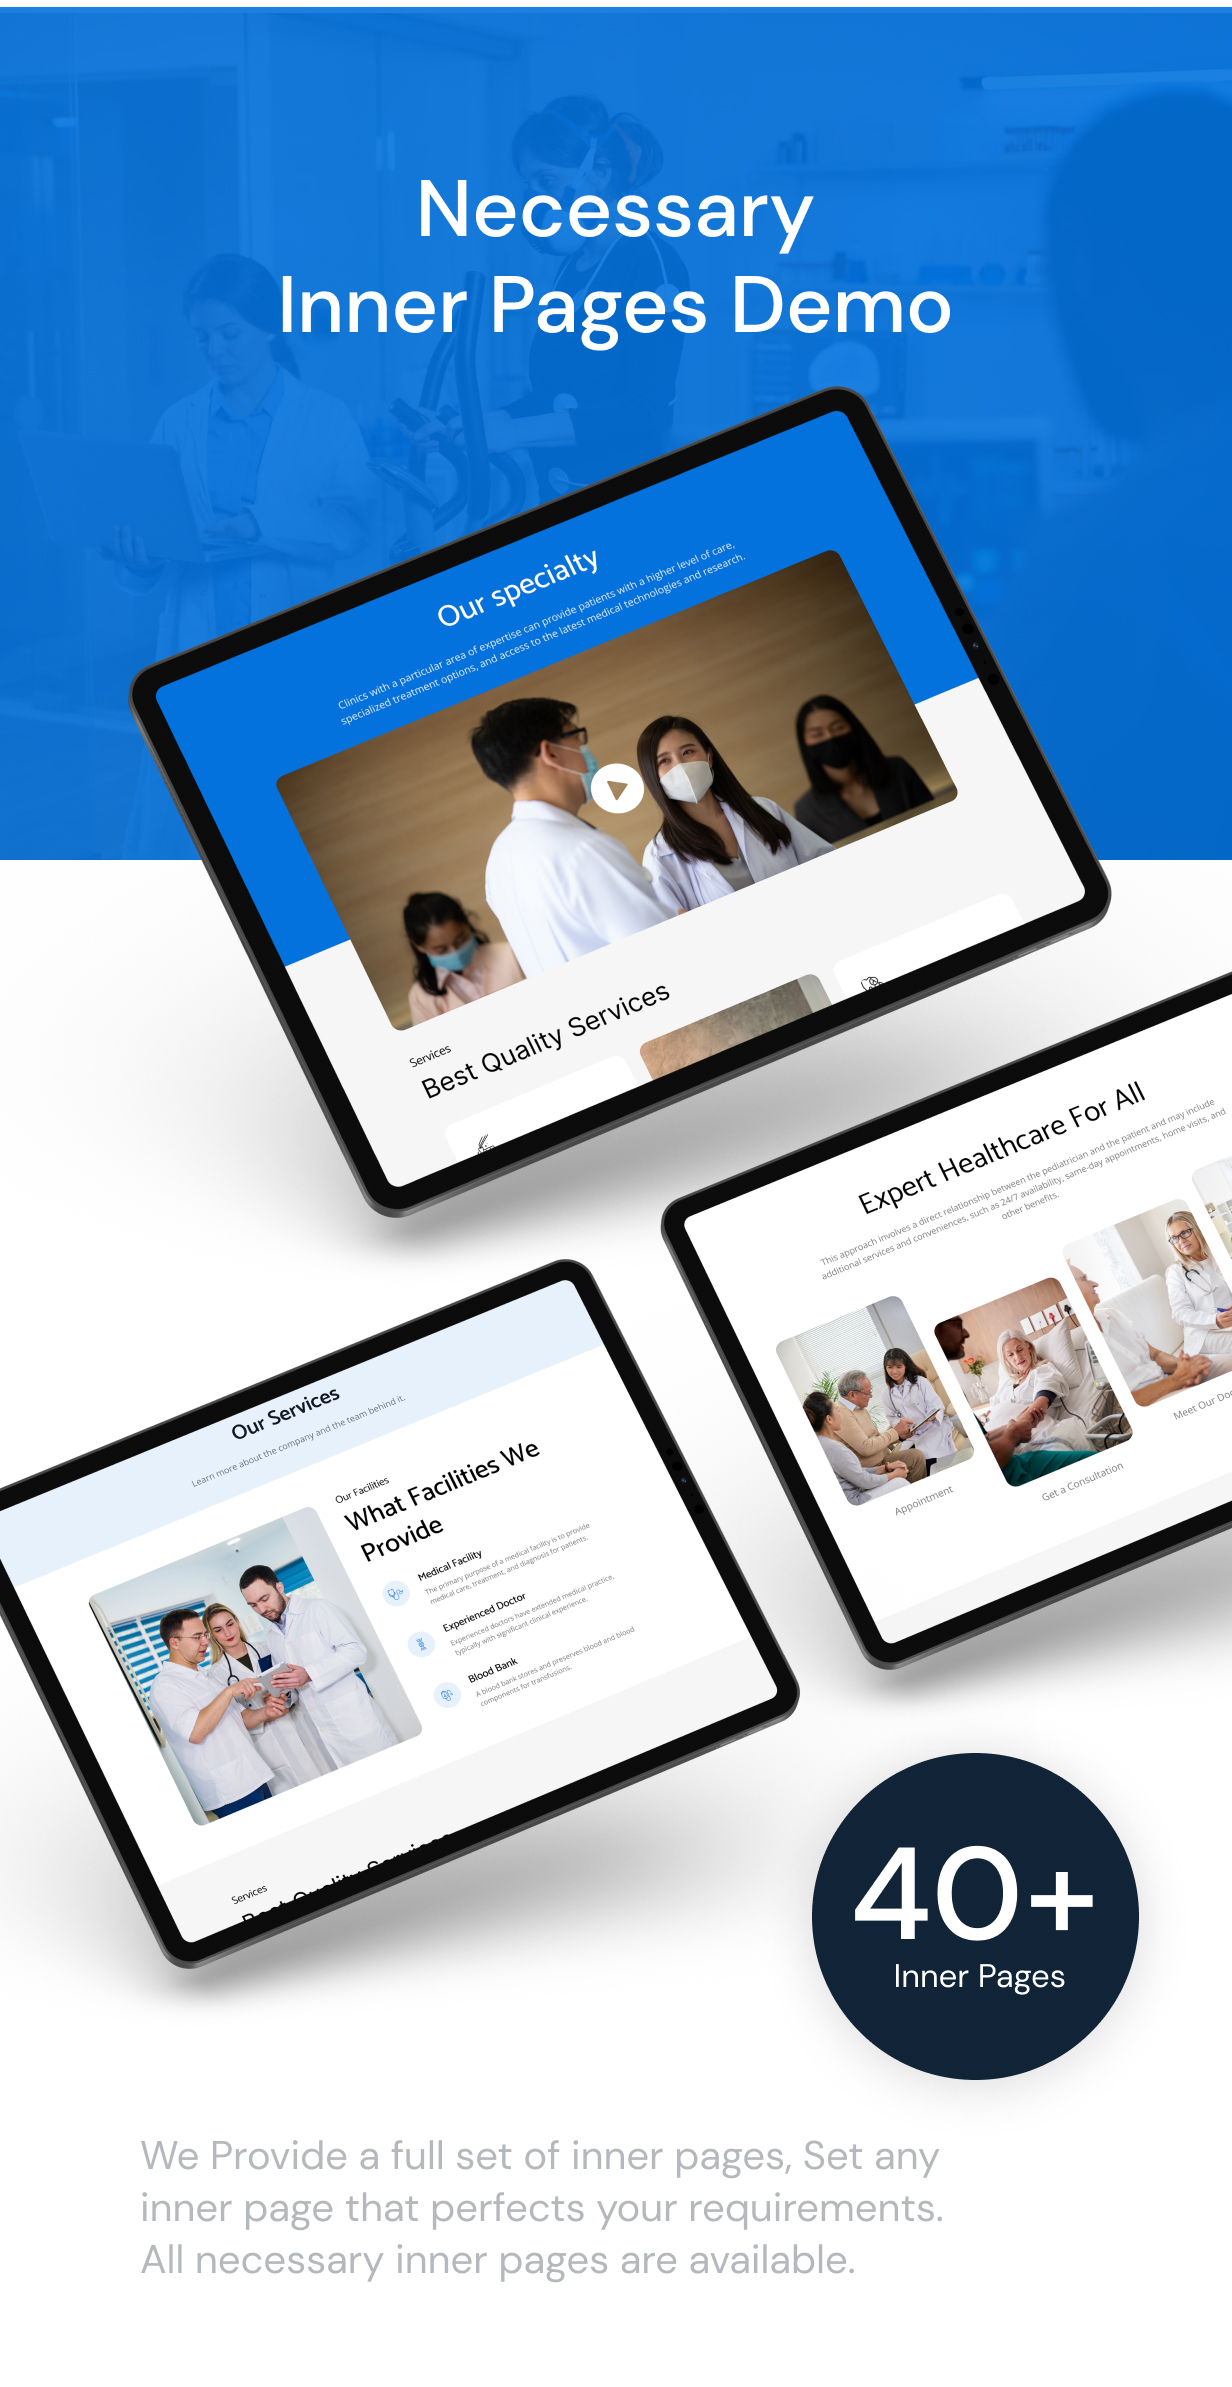 MedClinic - Doctor, Healthcare and Medical Figma Design Template - 3